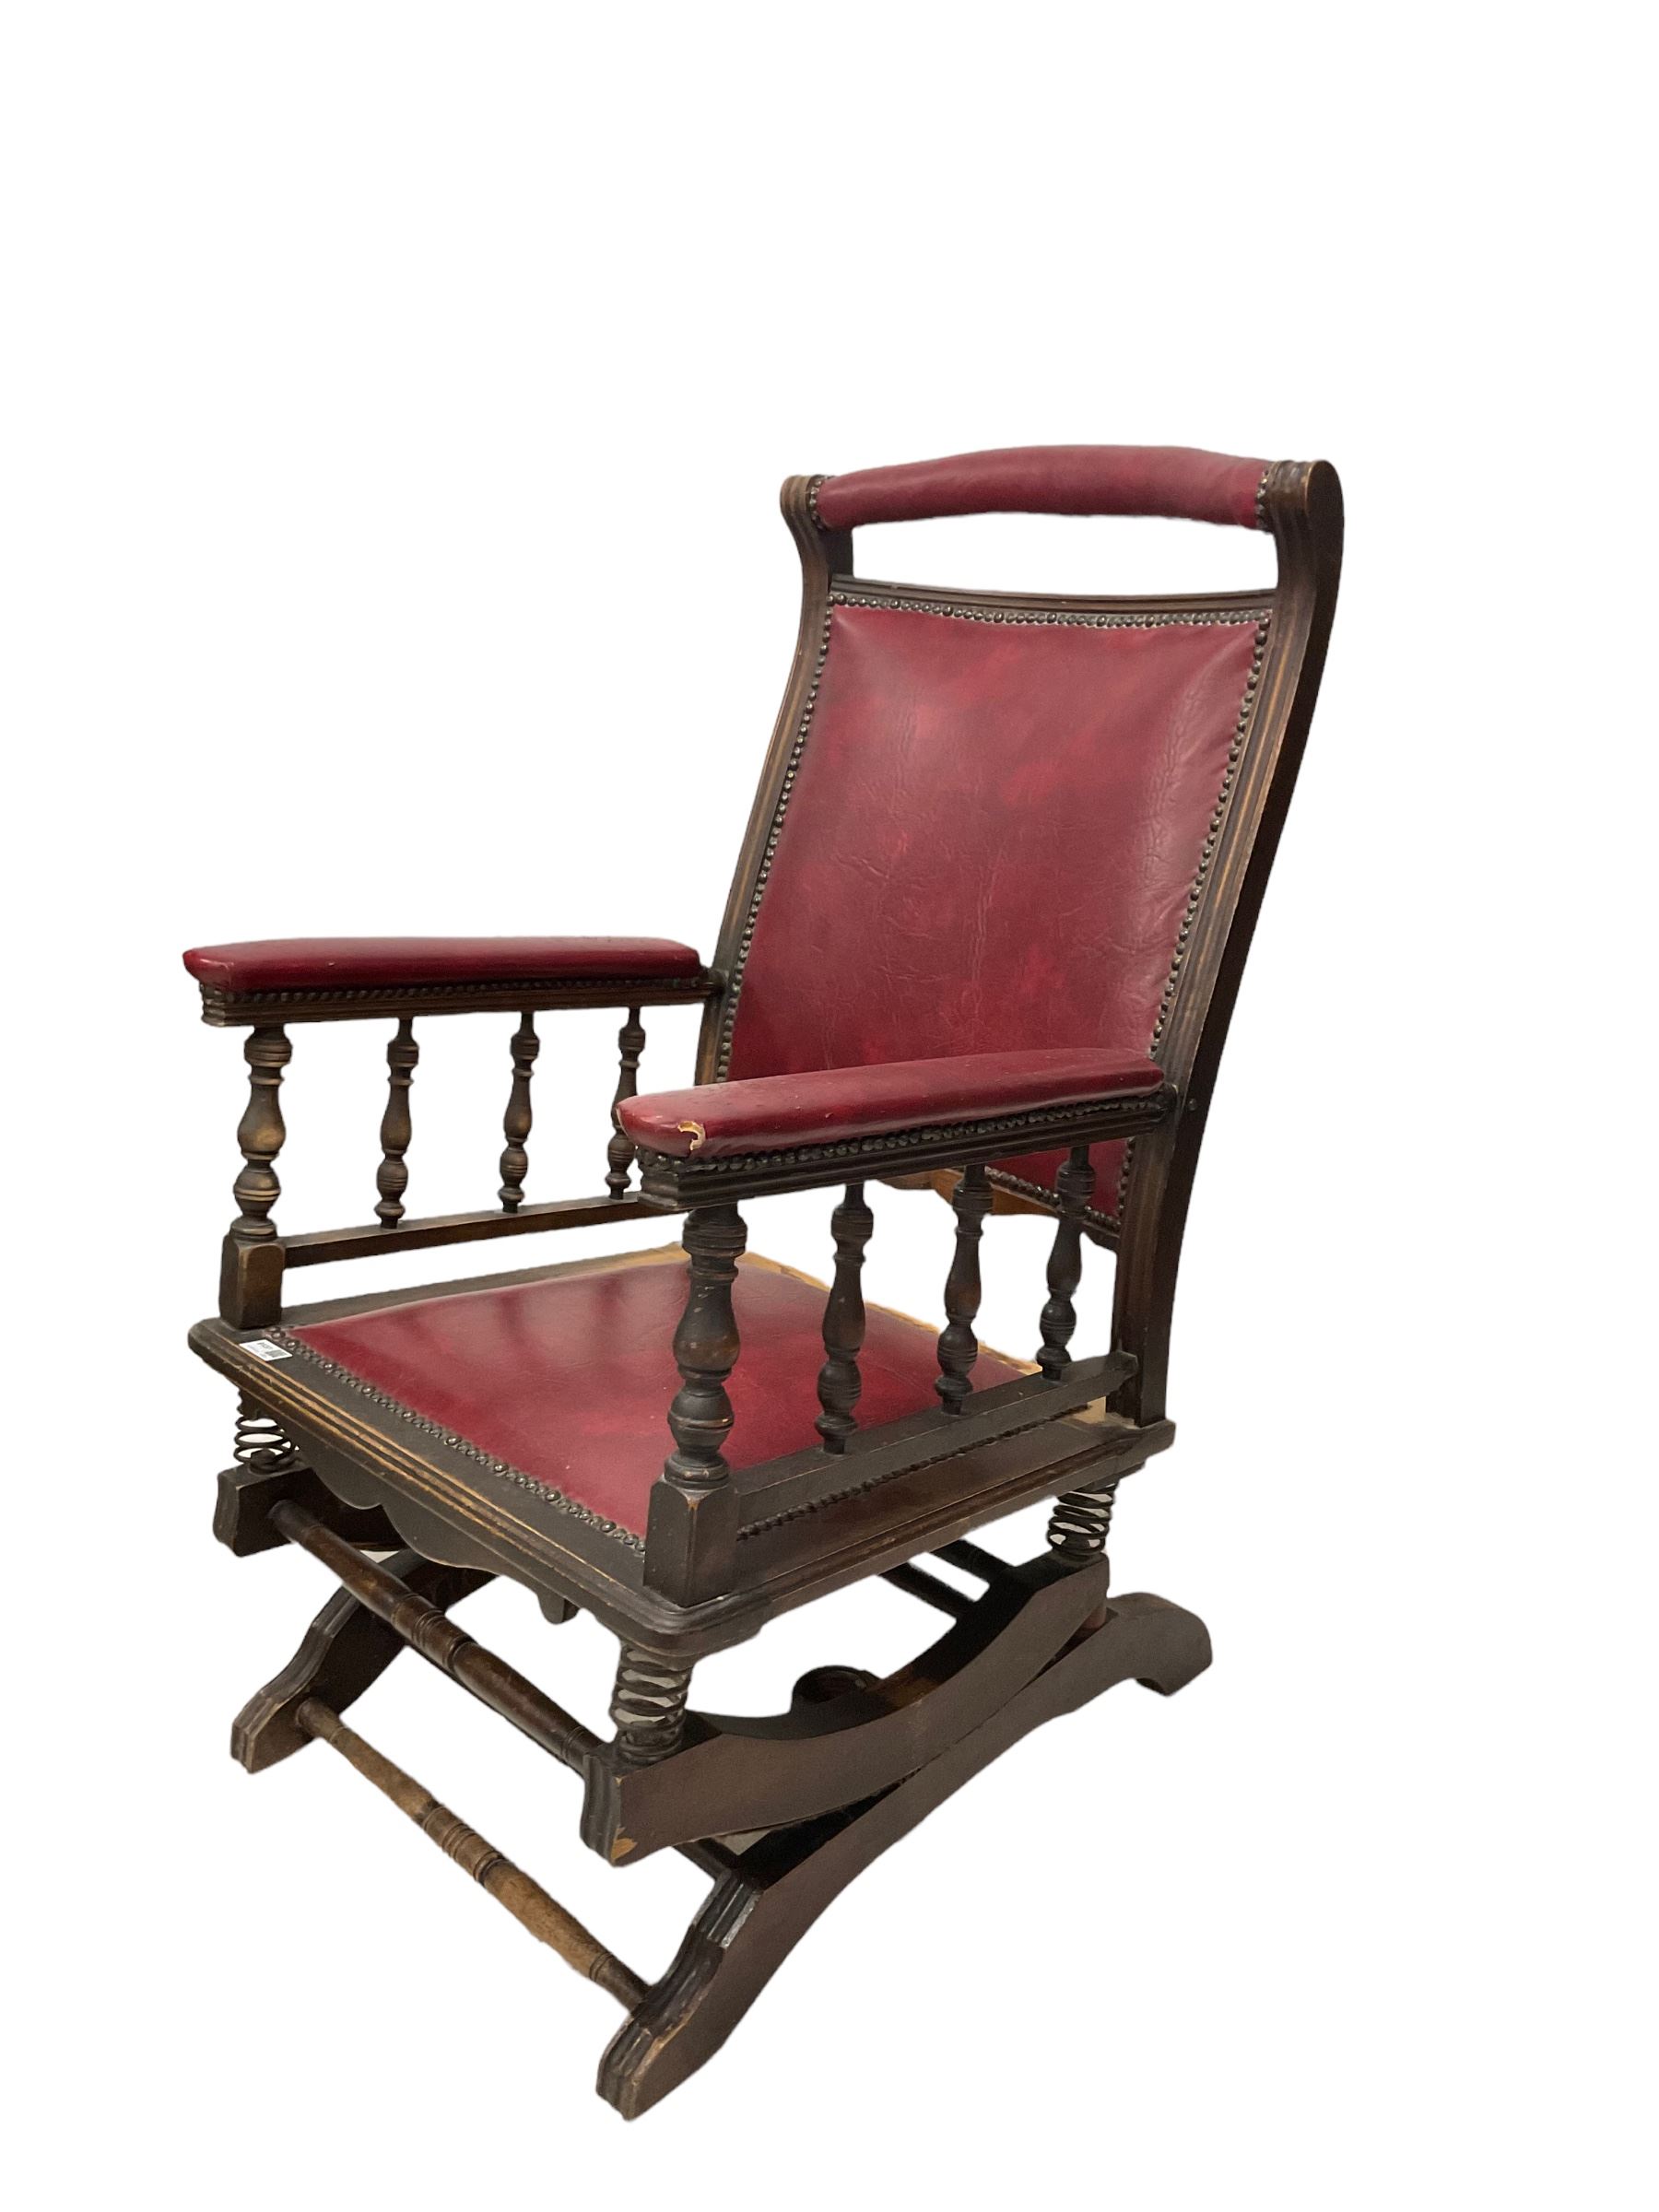 American style rocking chair in red leather